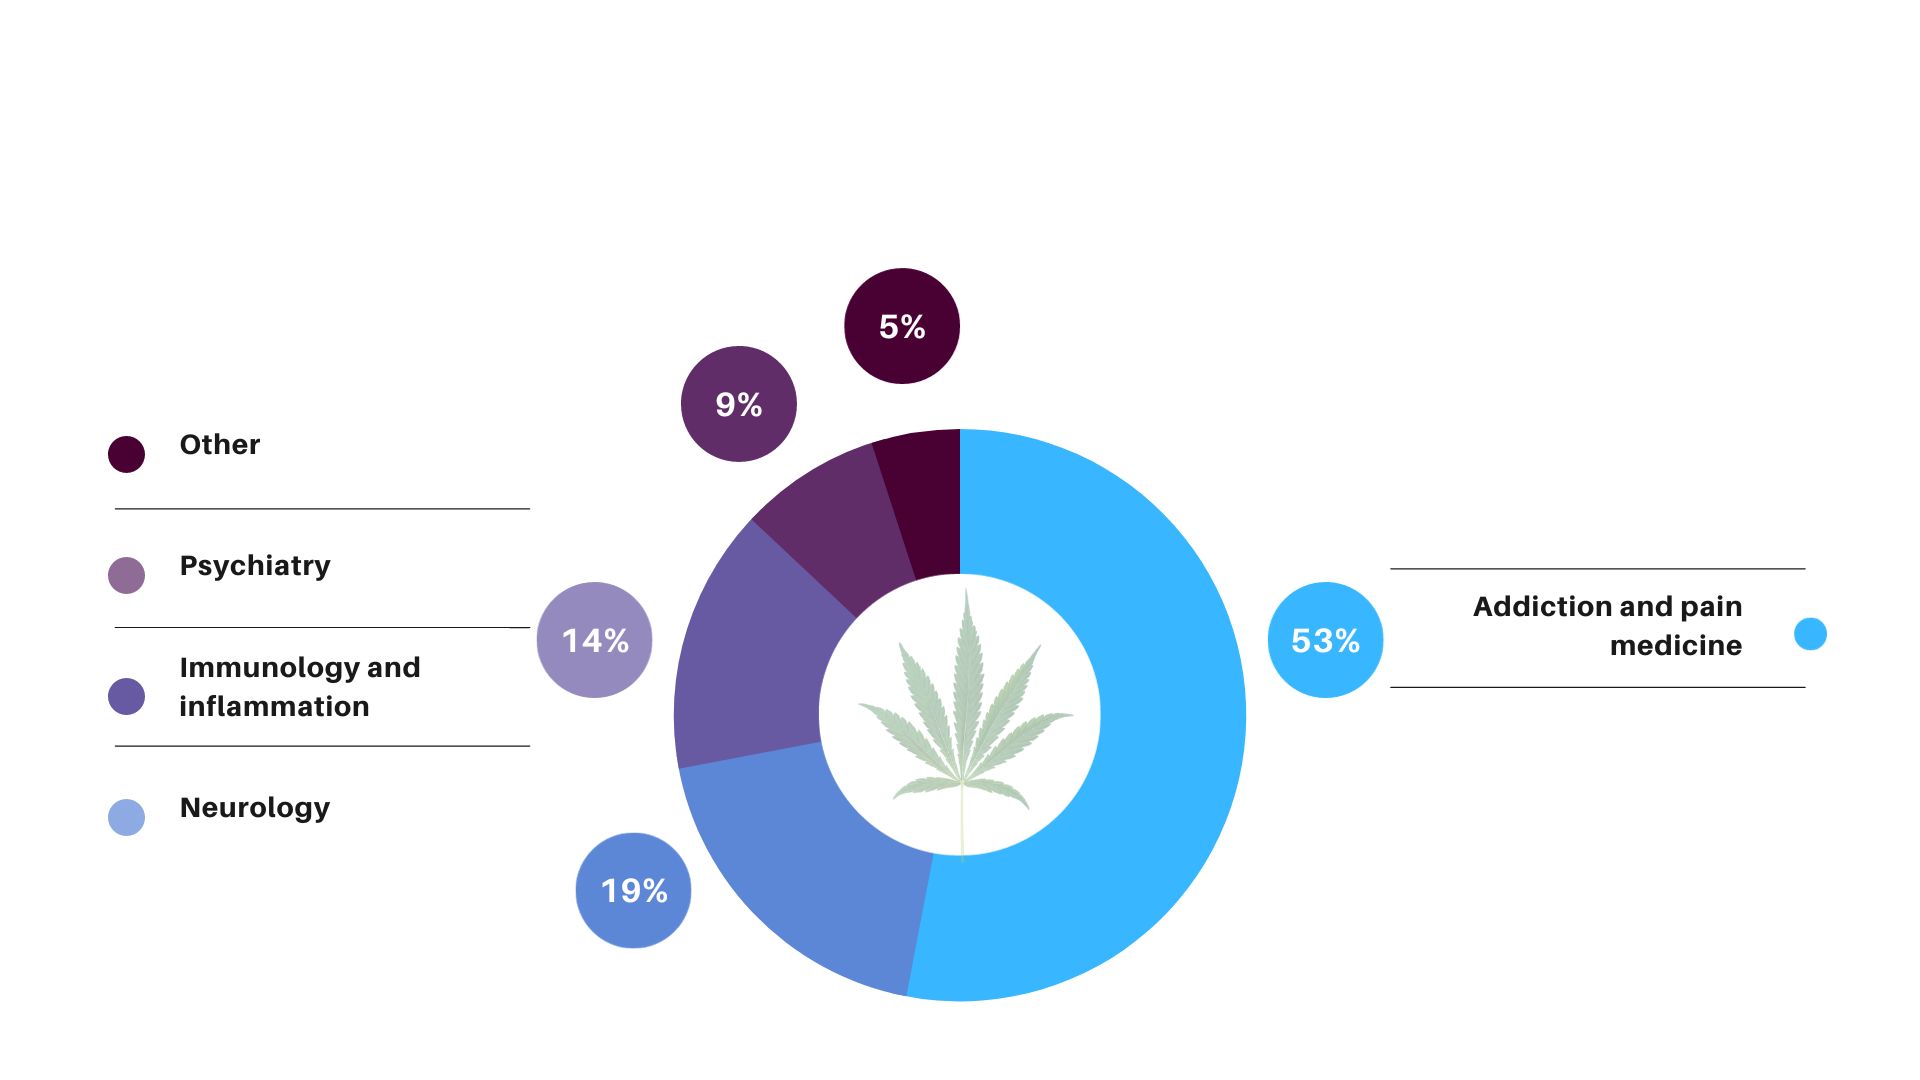 Cannabis Research Areas: 50% Addication and Pain Medicine, 19% Neurology, 14% Immunology and Inflammation, 9% Psychiatry, 5% Other